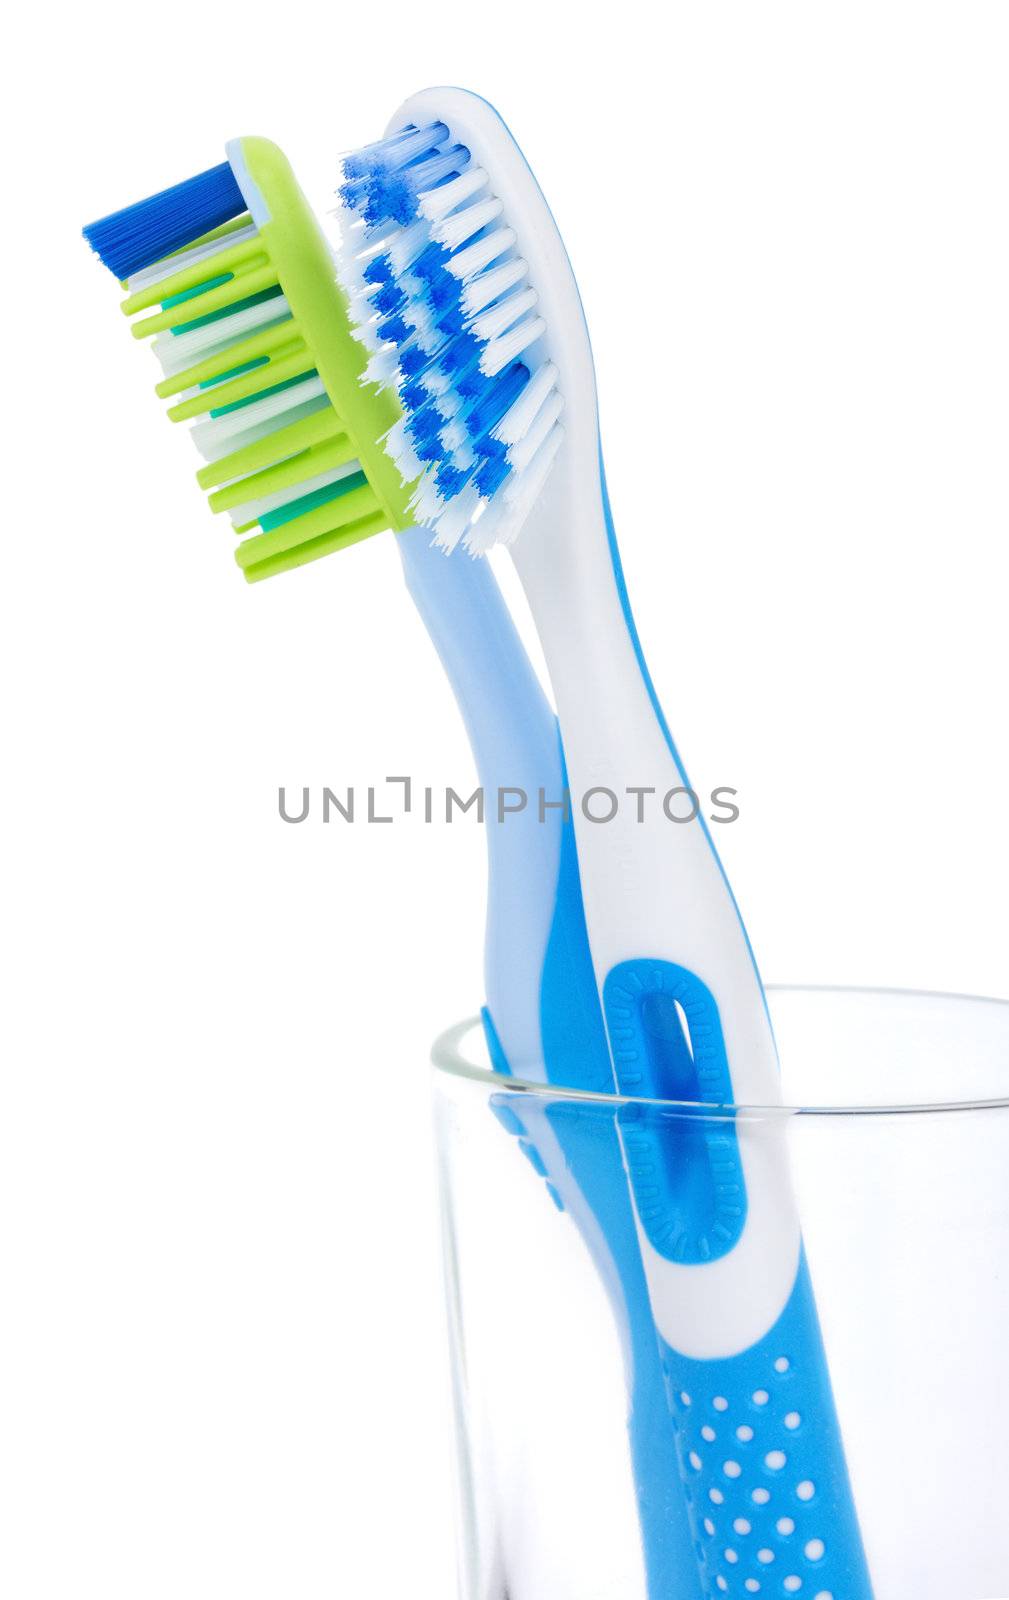 two tooth brushes in glass by Alekcey